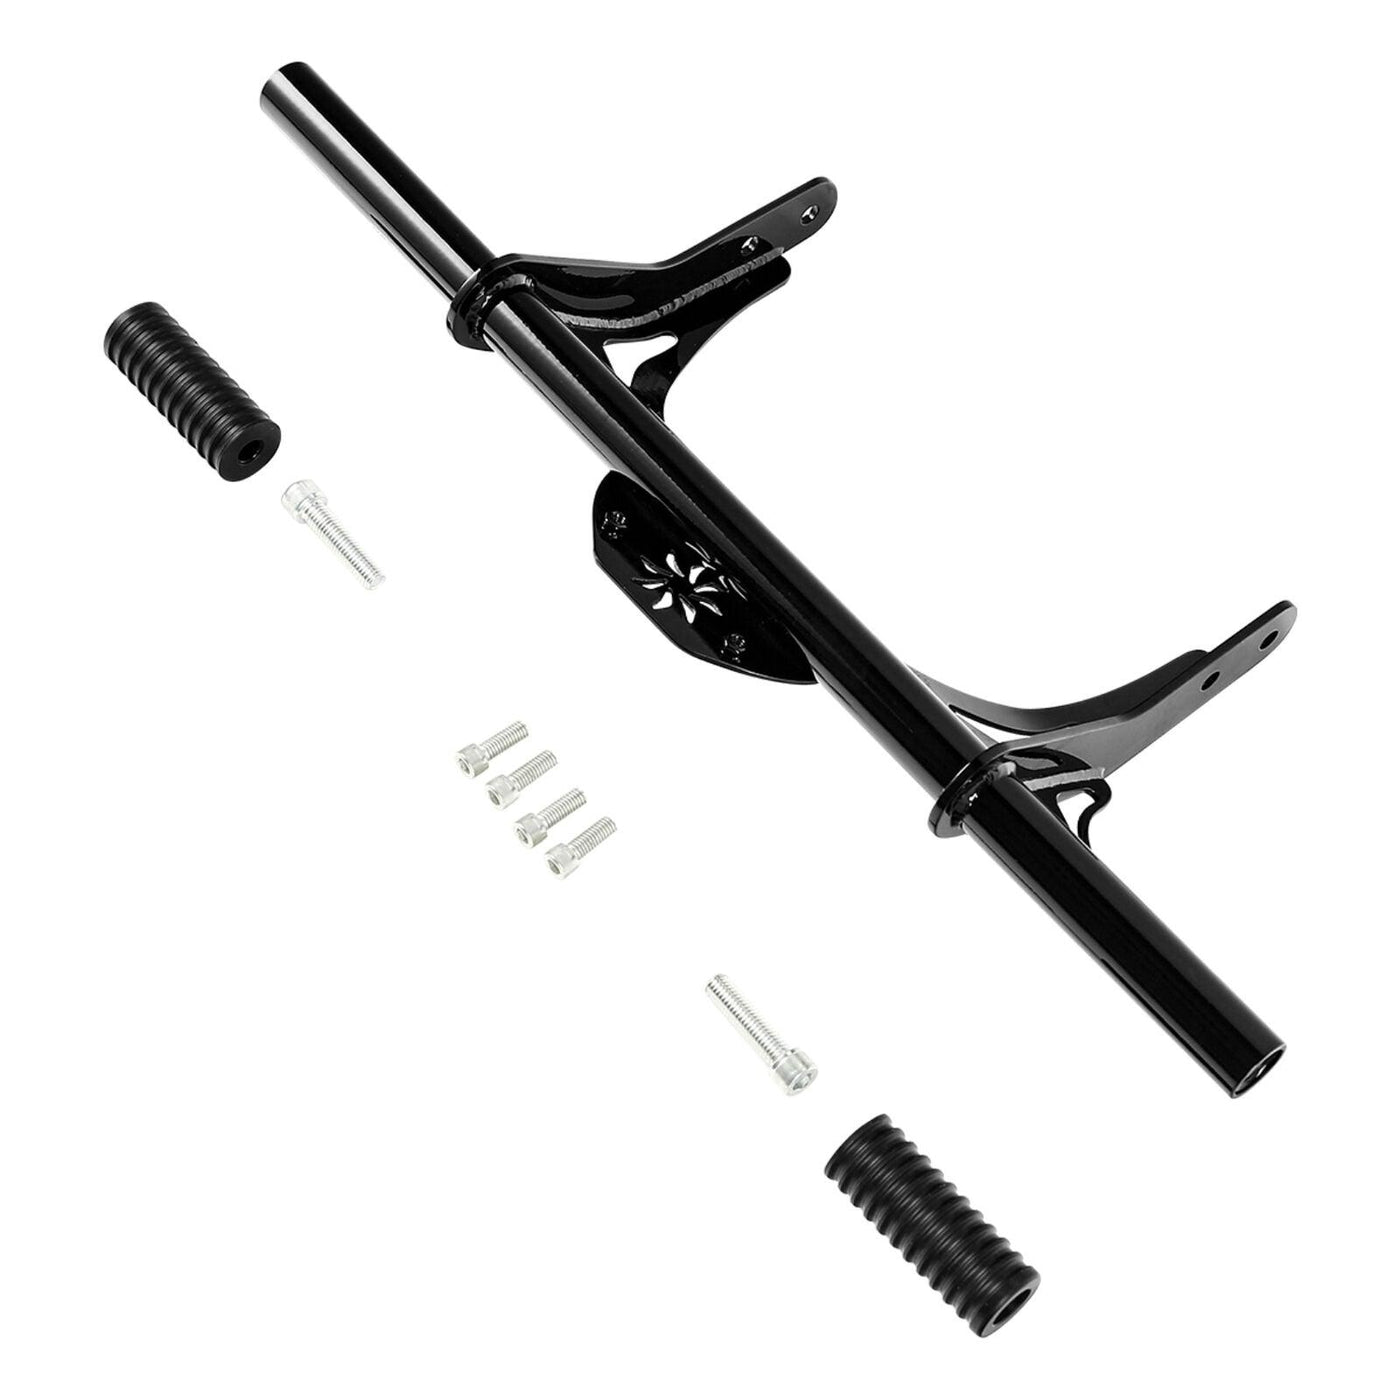 Front Crash Bar Protector Fit For Harley Street Bob Low Rider Mid Control 06-17 - Moto Life Products